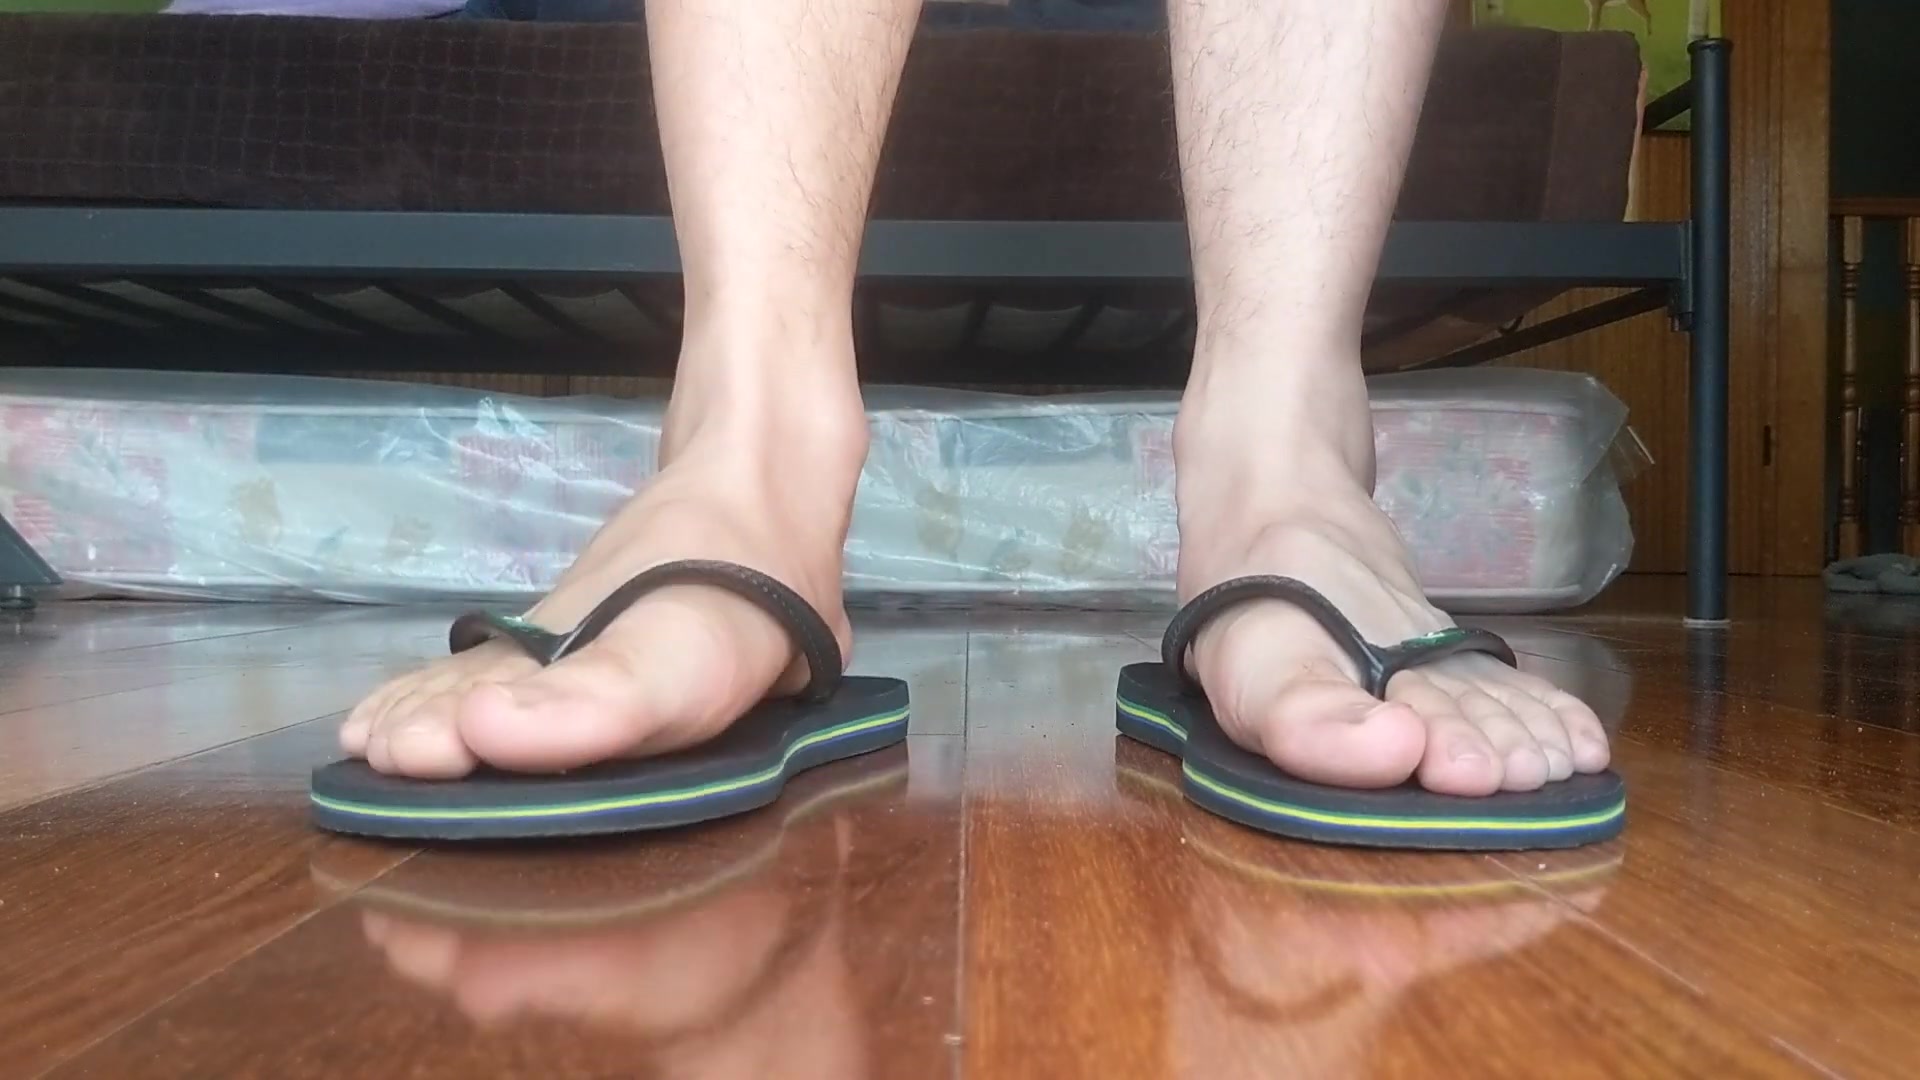 Watch male feet in flip flops video 8 on ThisVid, the HD tube site with a l...